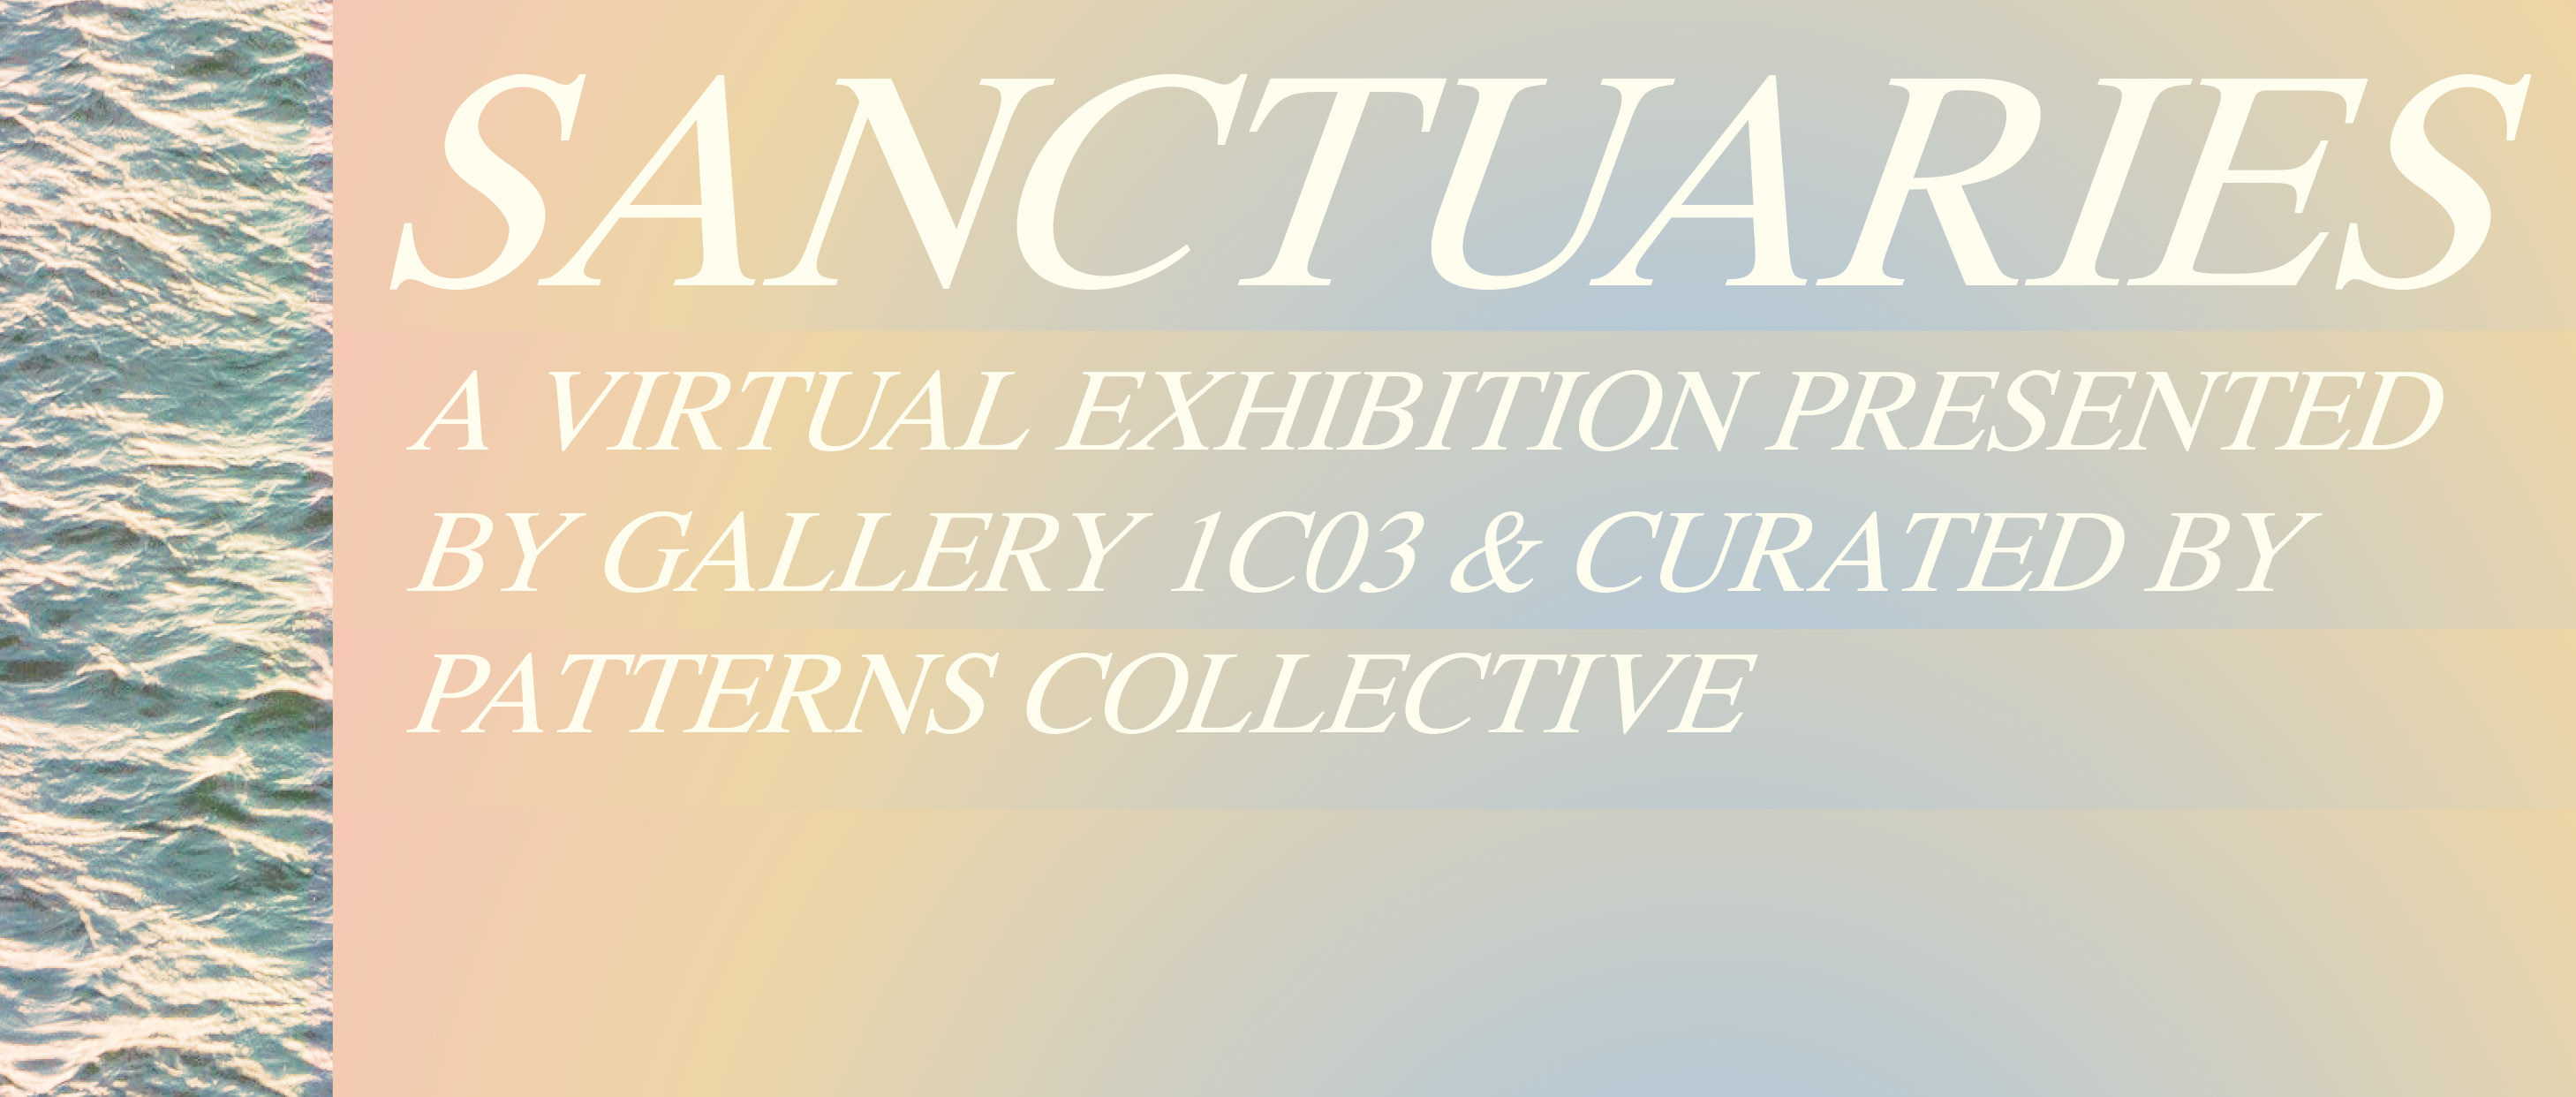 Graphic with peach to pale blue background overlaid with white text that reads "Sanctuaries A Virtual Exhibition Presented by Gallery 1C03 & Curated by Patterns Collective." A photograph of water is along the left edge of the graphic.